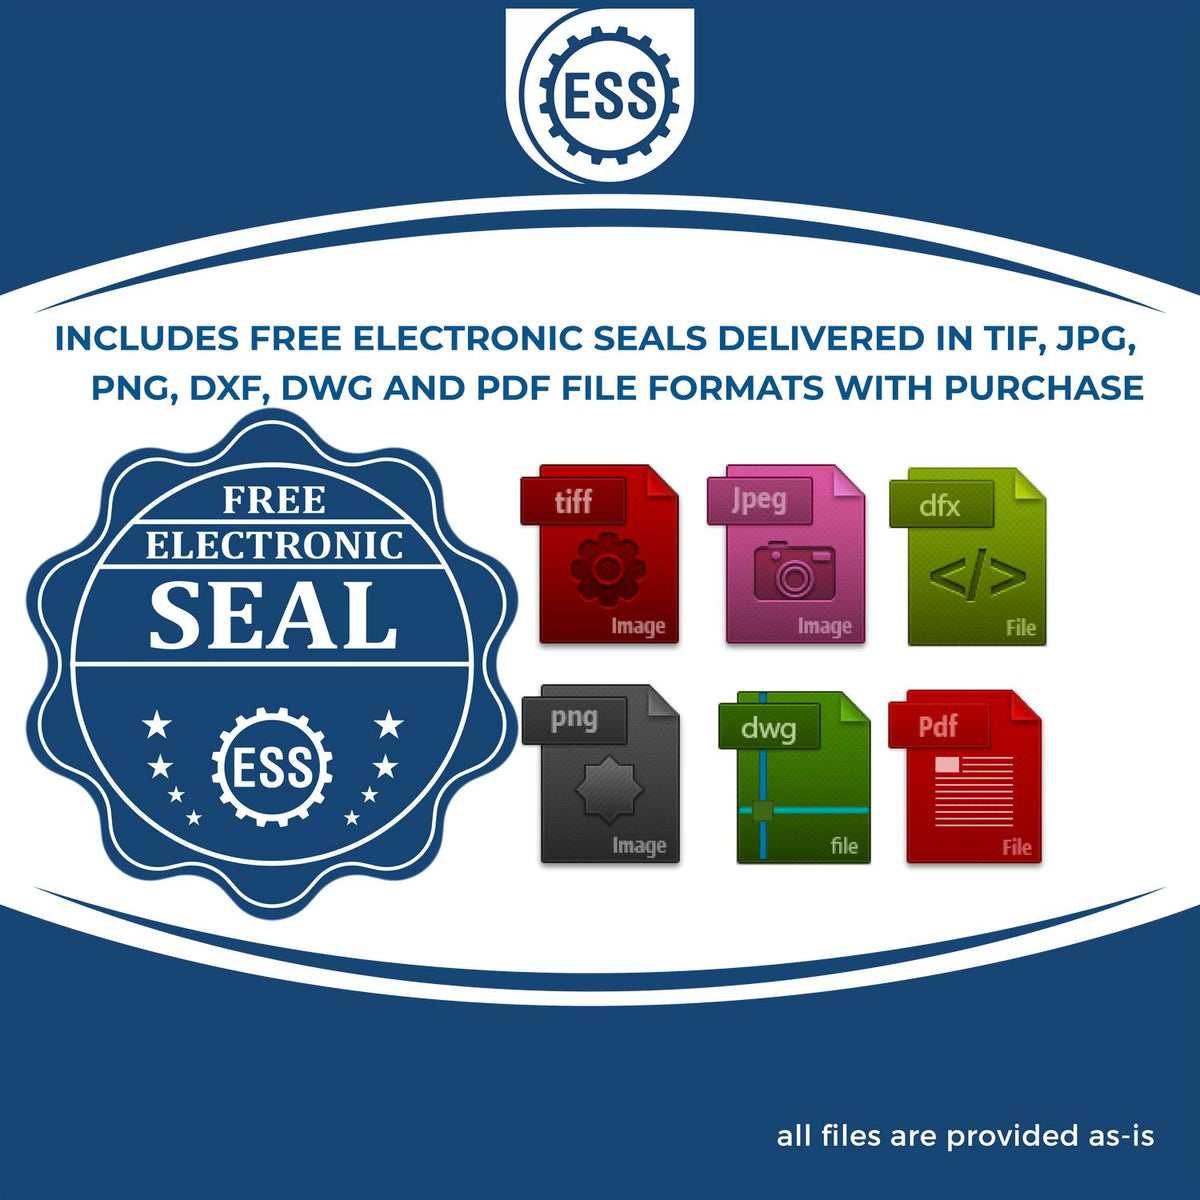 An infographic for the free electronic seal for the Hybrid Hawaii Geologist Seal illustrating the different file type icons such as DXF, DWG, TIF, JPG and PNG.